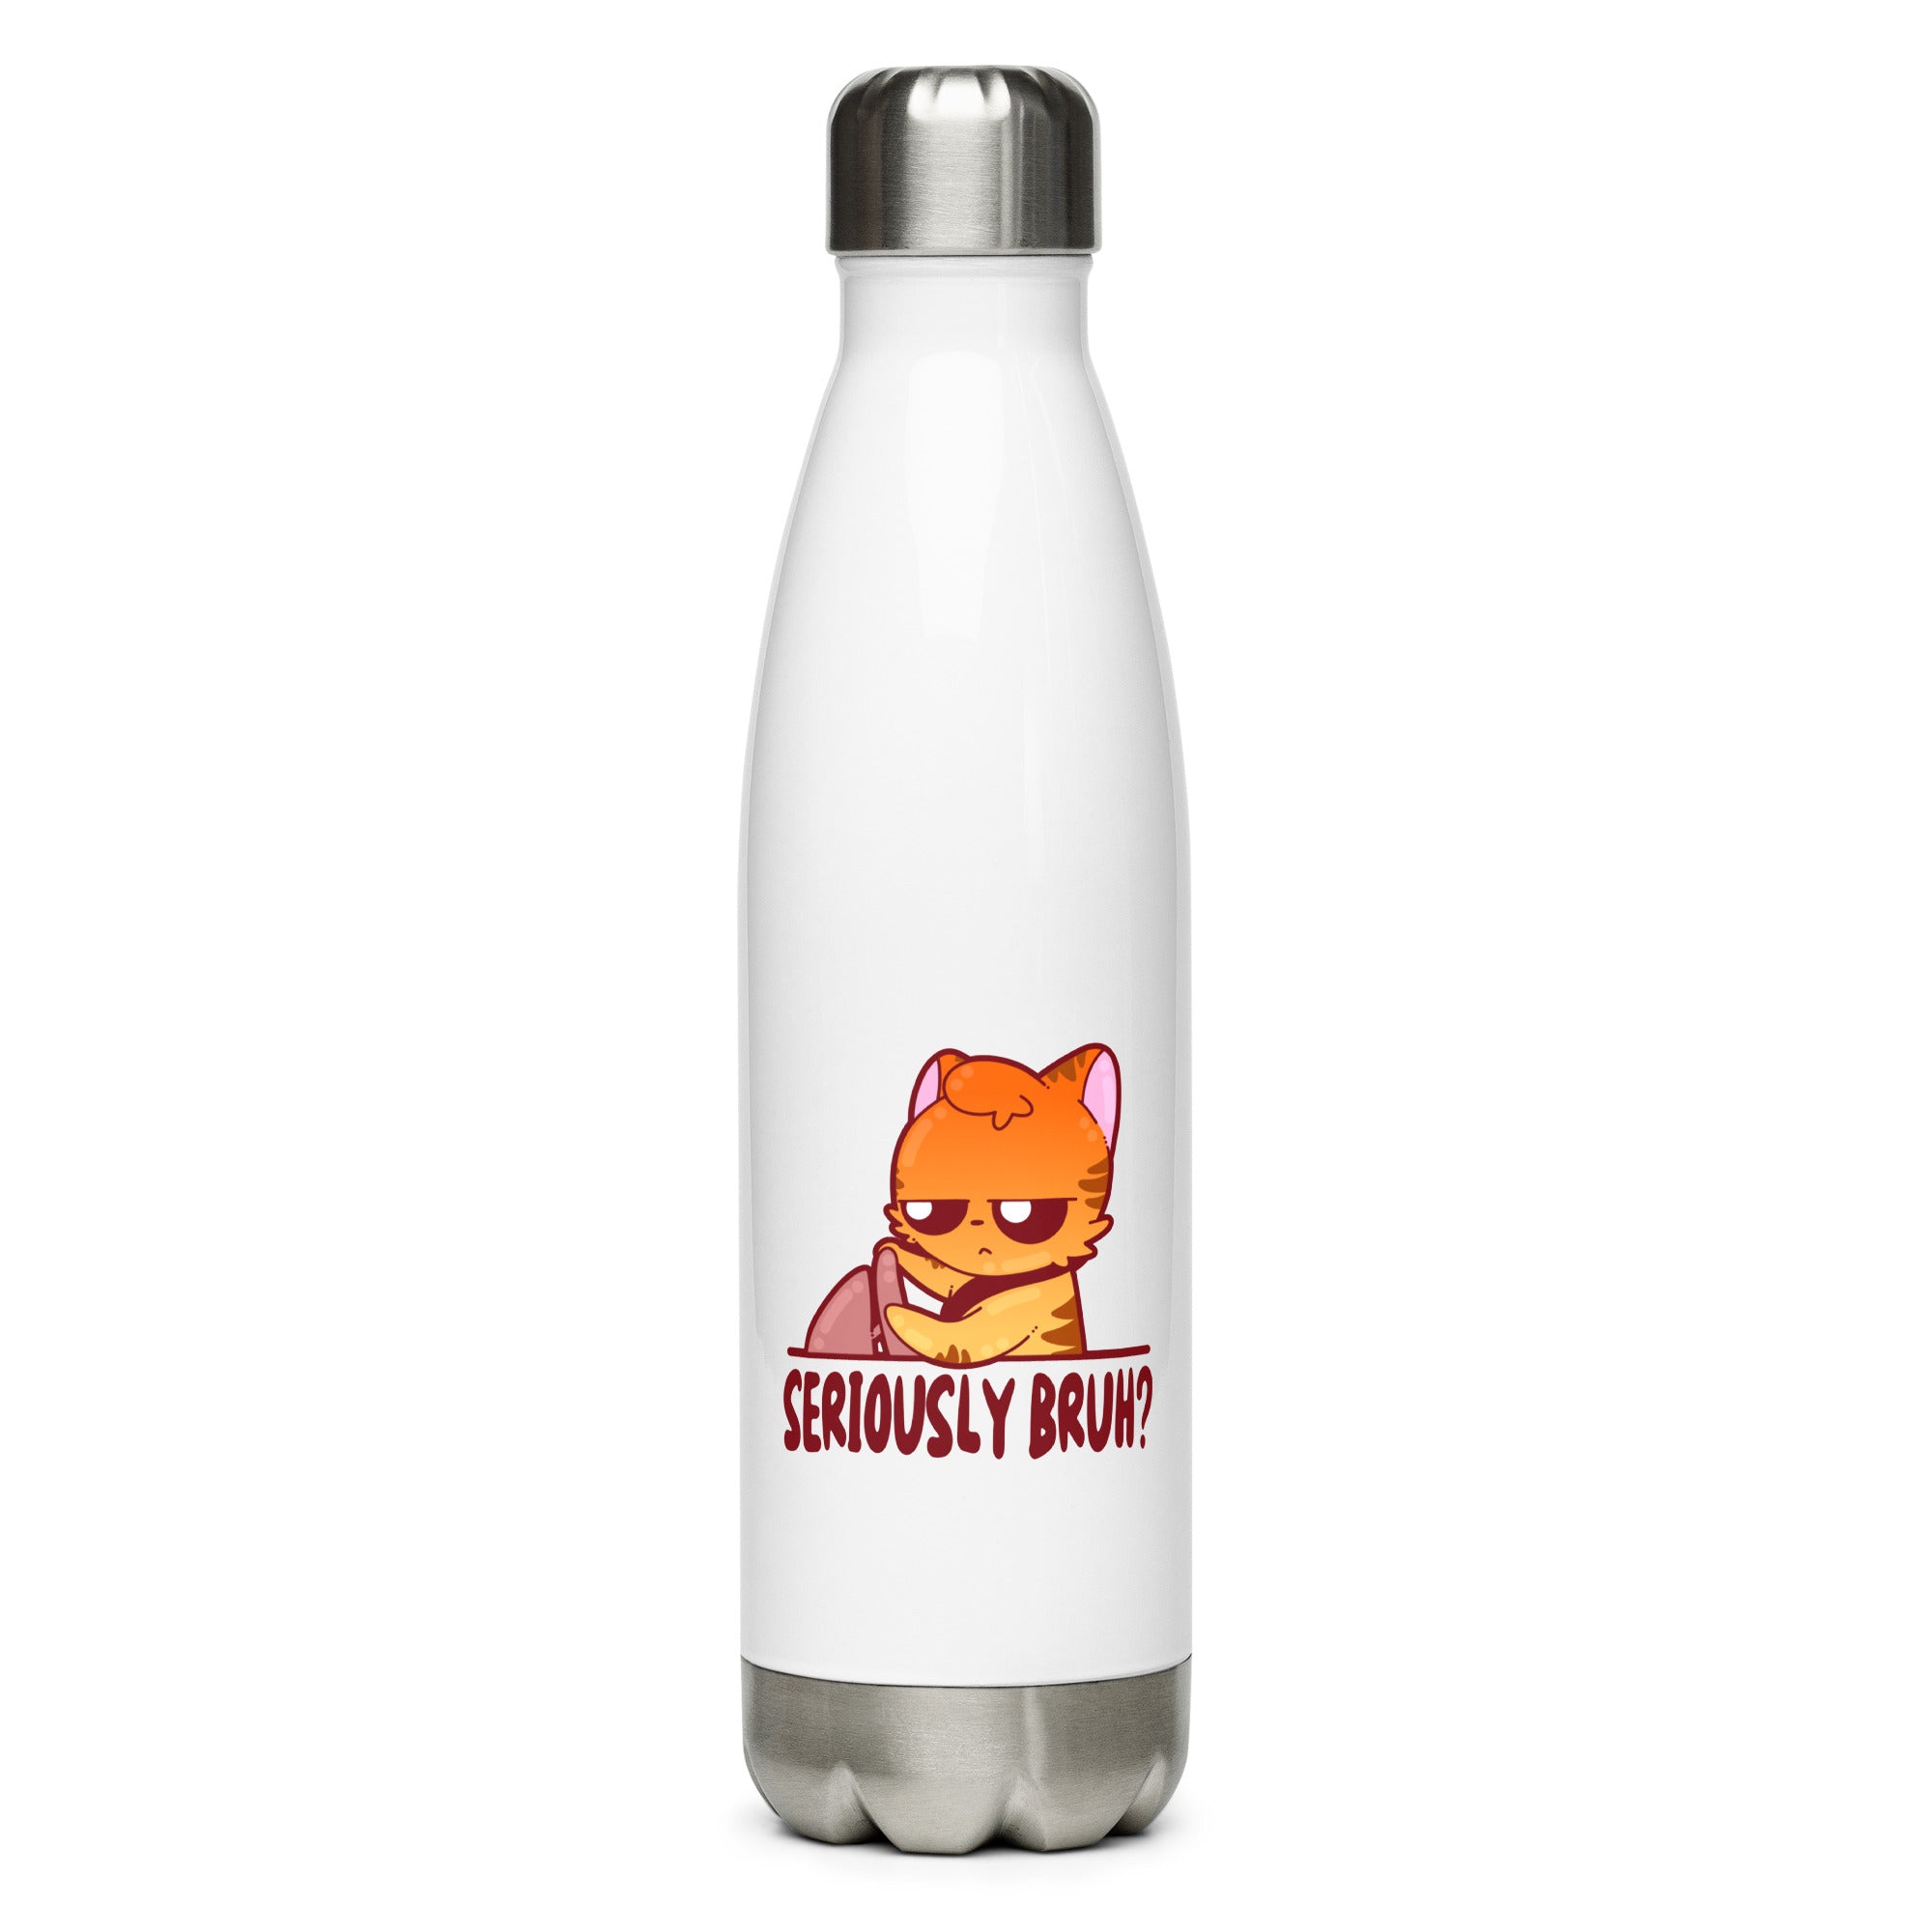 SERIOUSLY BRUH  - Stainless Steel Water Bottle - ChubbleGumLLC